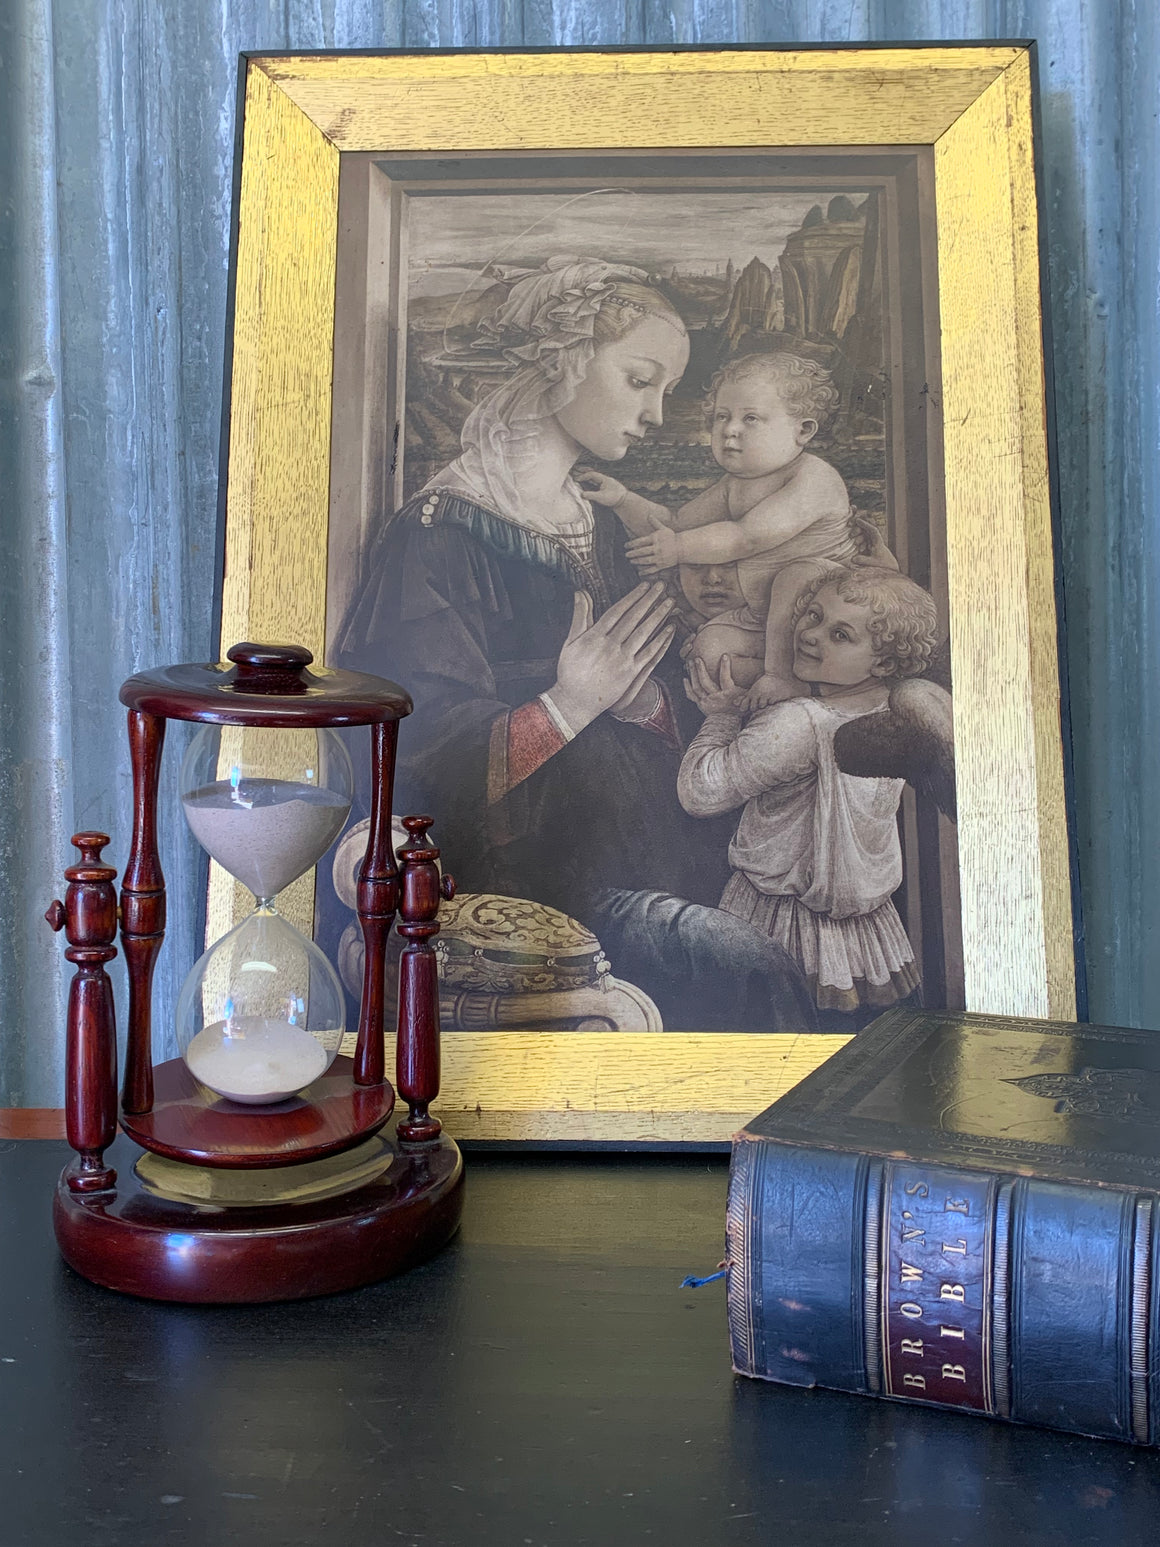 A mahogany rotating hourglass or sand timer